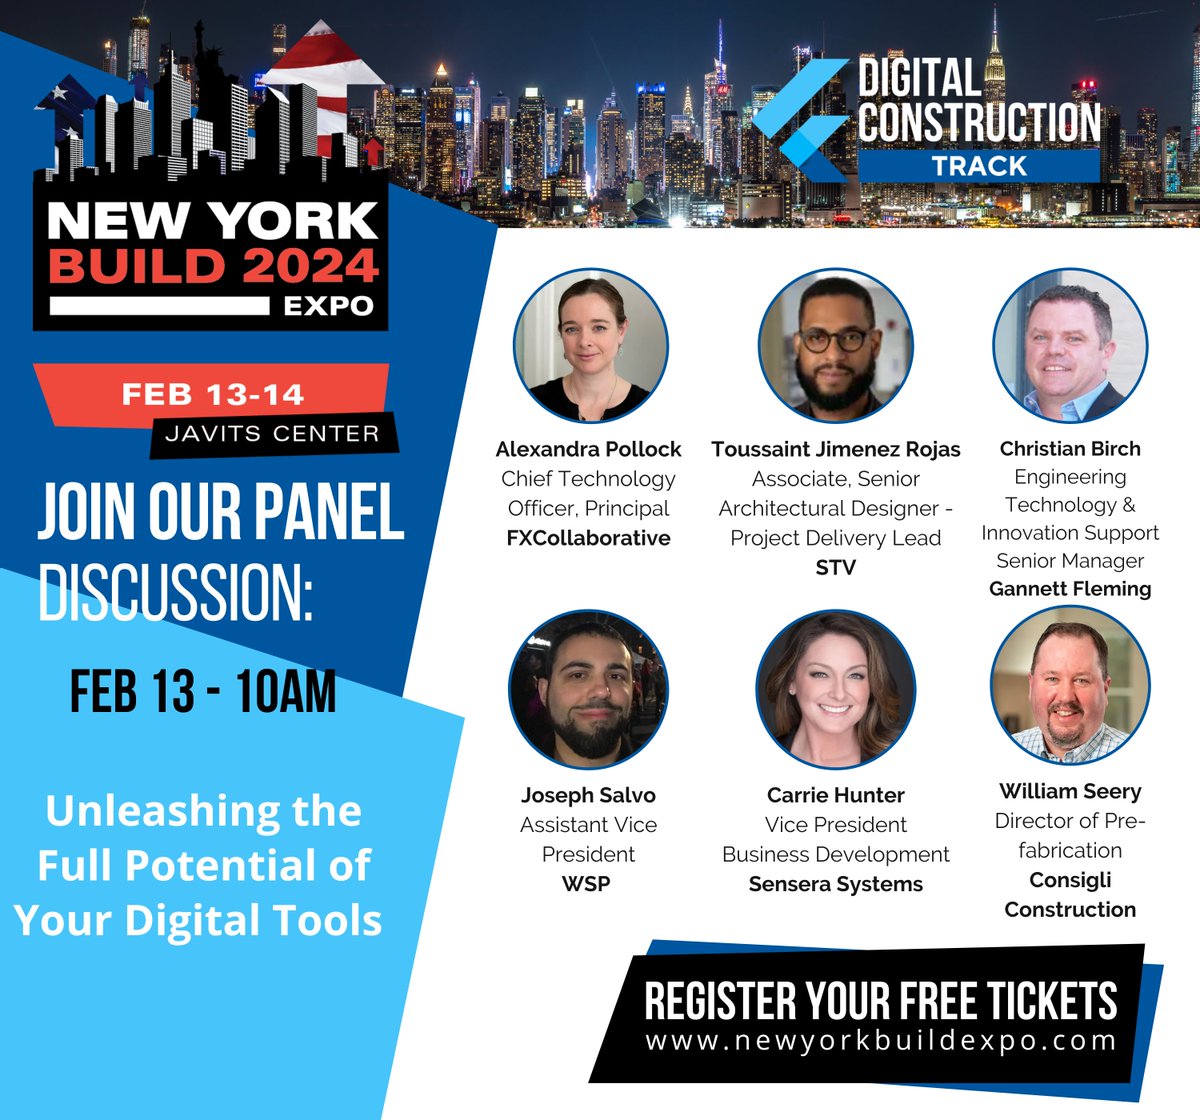 Interested in learning more about how to fully utilise the full potential of your digital tools in #DigitalConstruction?  

Come join our industry leading experts on the panel discussion below at #NewYorkBuild on 13 Feb, 10am at the Javits Center (Just two weeks to go!)🏗️